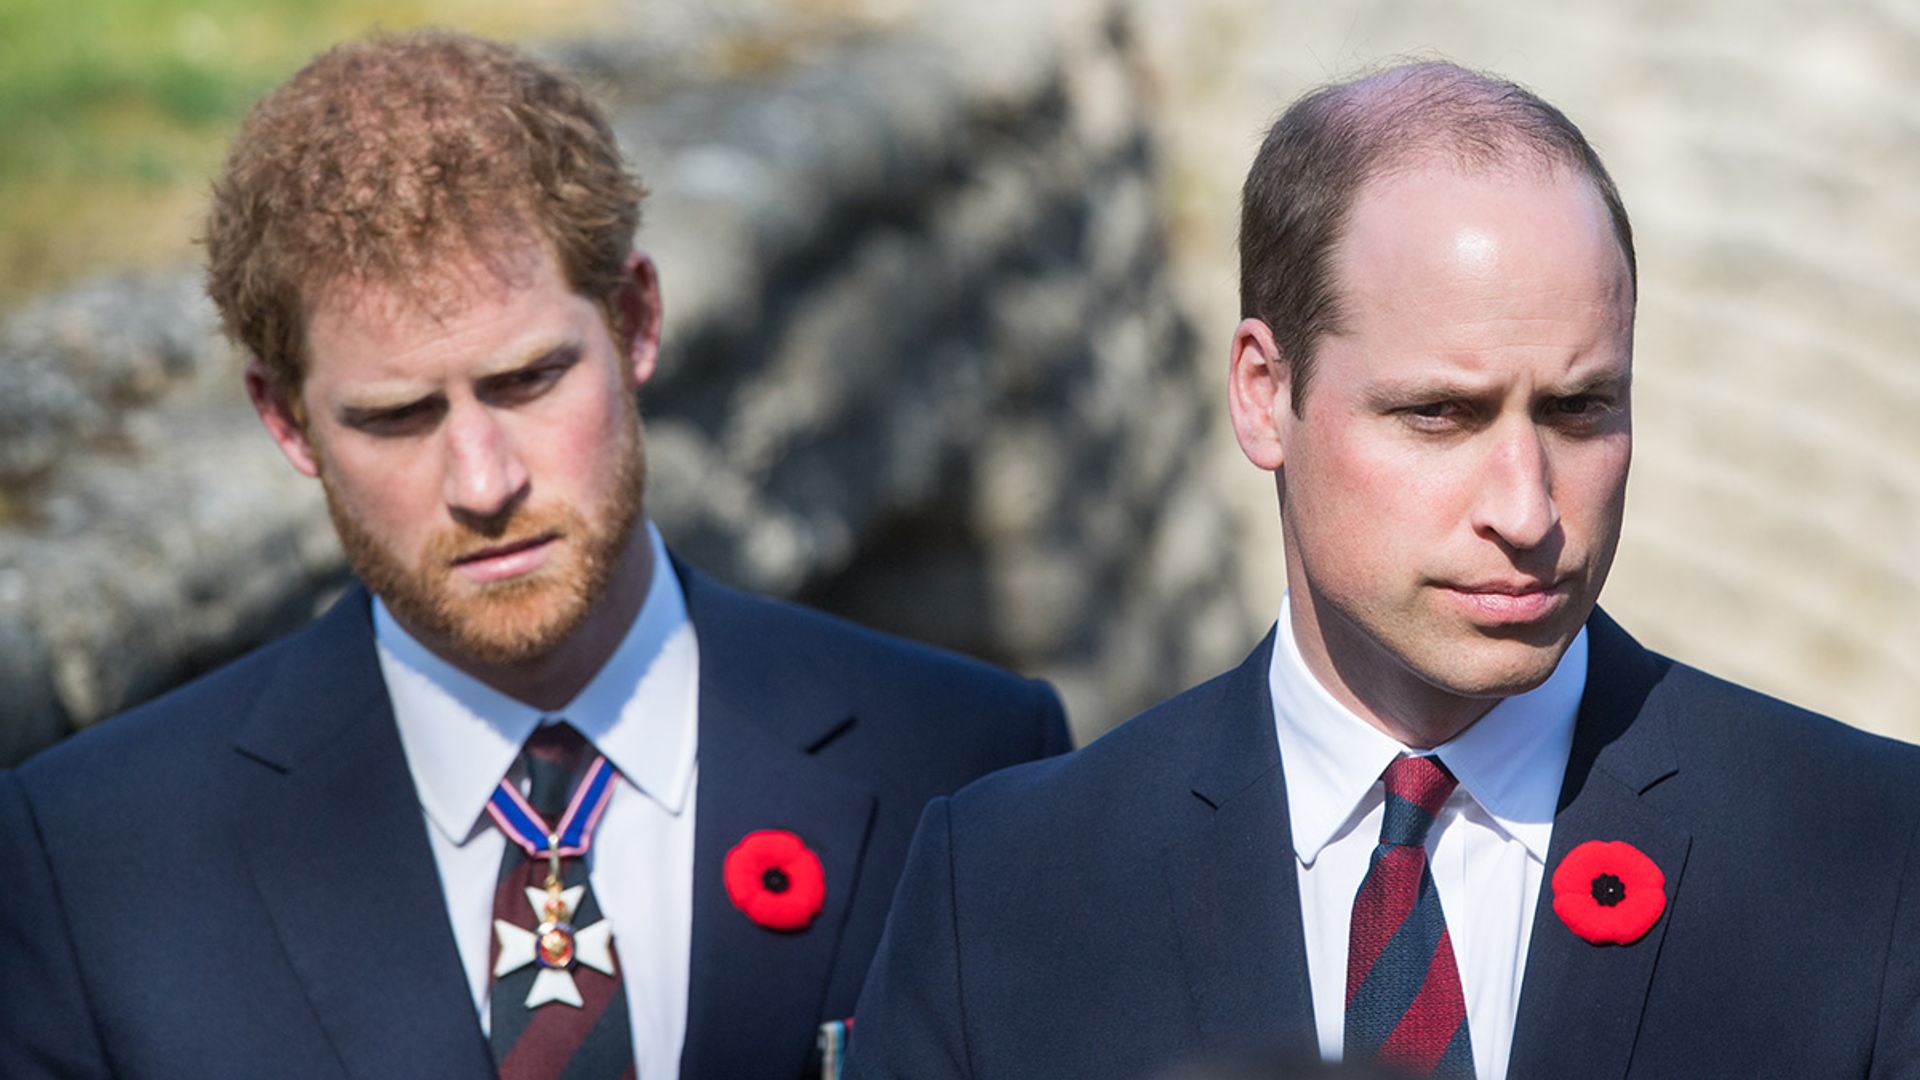 Princes William and Harry finally talk after Oprah interview but friend says it was 'unproductive'